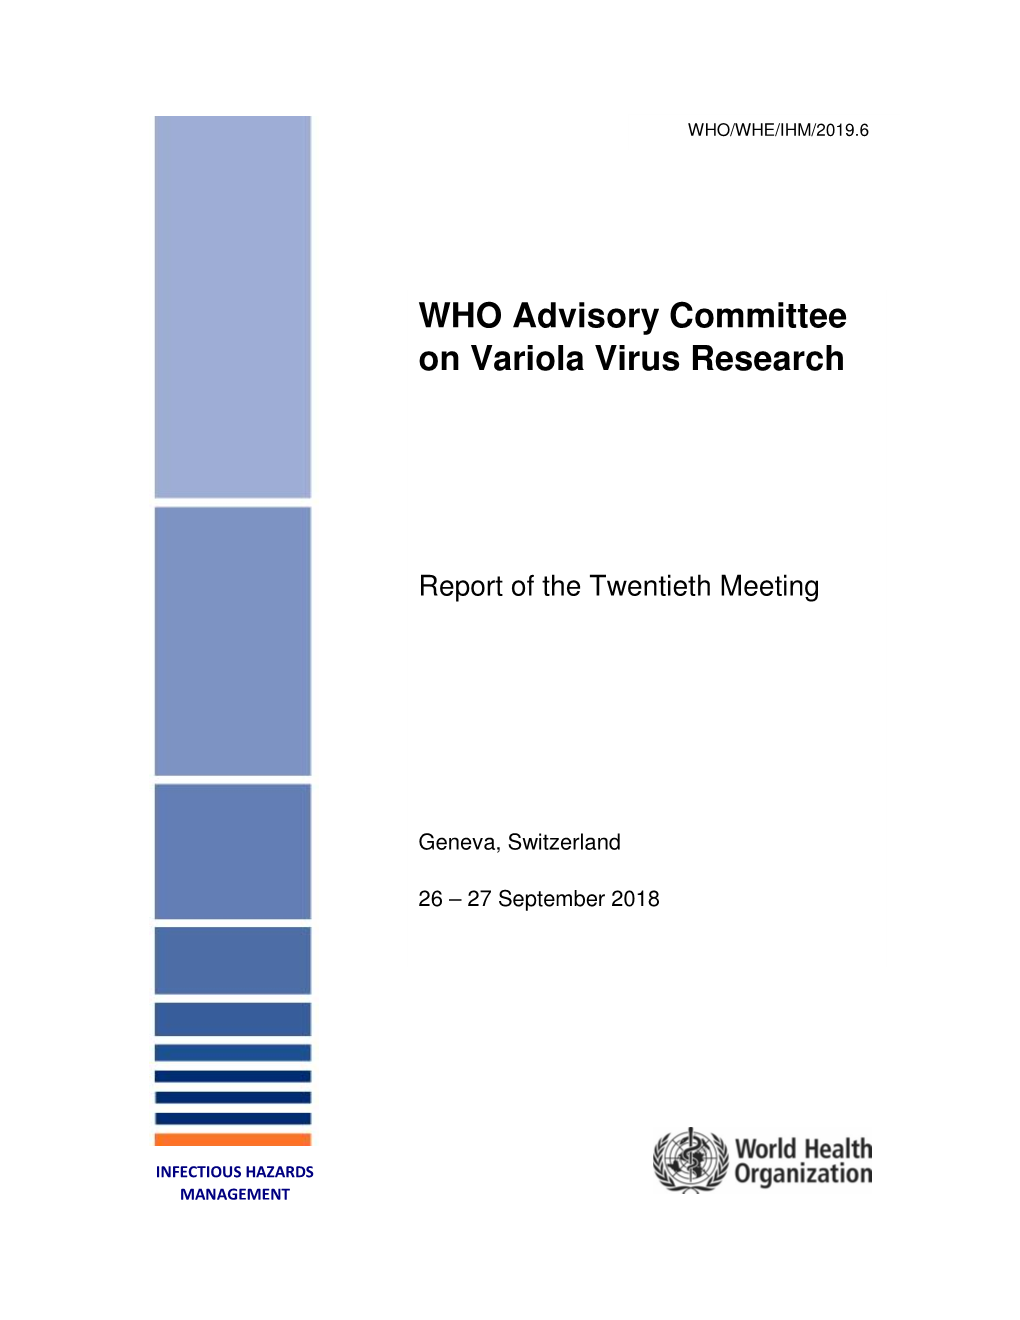 WHO Advisory Committee on Variola Virus Research: Report of the Twentieth Meeting